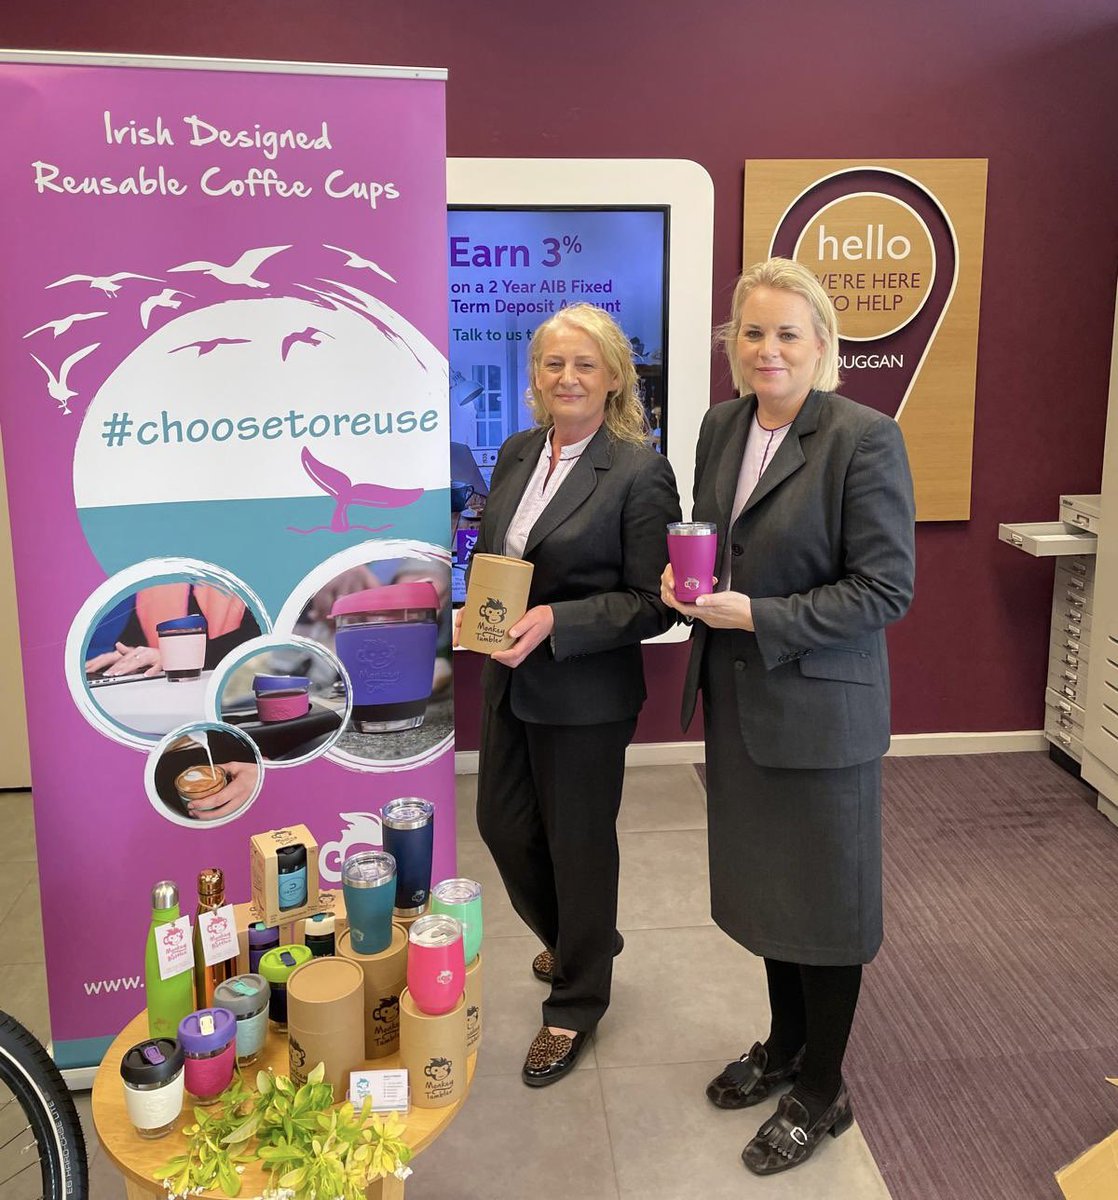 Thank you Kay Ruddle and all the Team at #AIB Lisduggan Branch #Waterford for putting the spotlight on #sustainability last week. It was great to be part of your #EarthWeek initiative 🌍

@AIBBiz #MonkeyCups #collaboration  
#coffee #choosetoreuse #supportedbyAIB ♻️